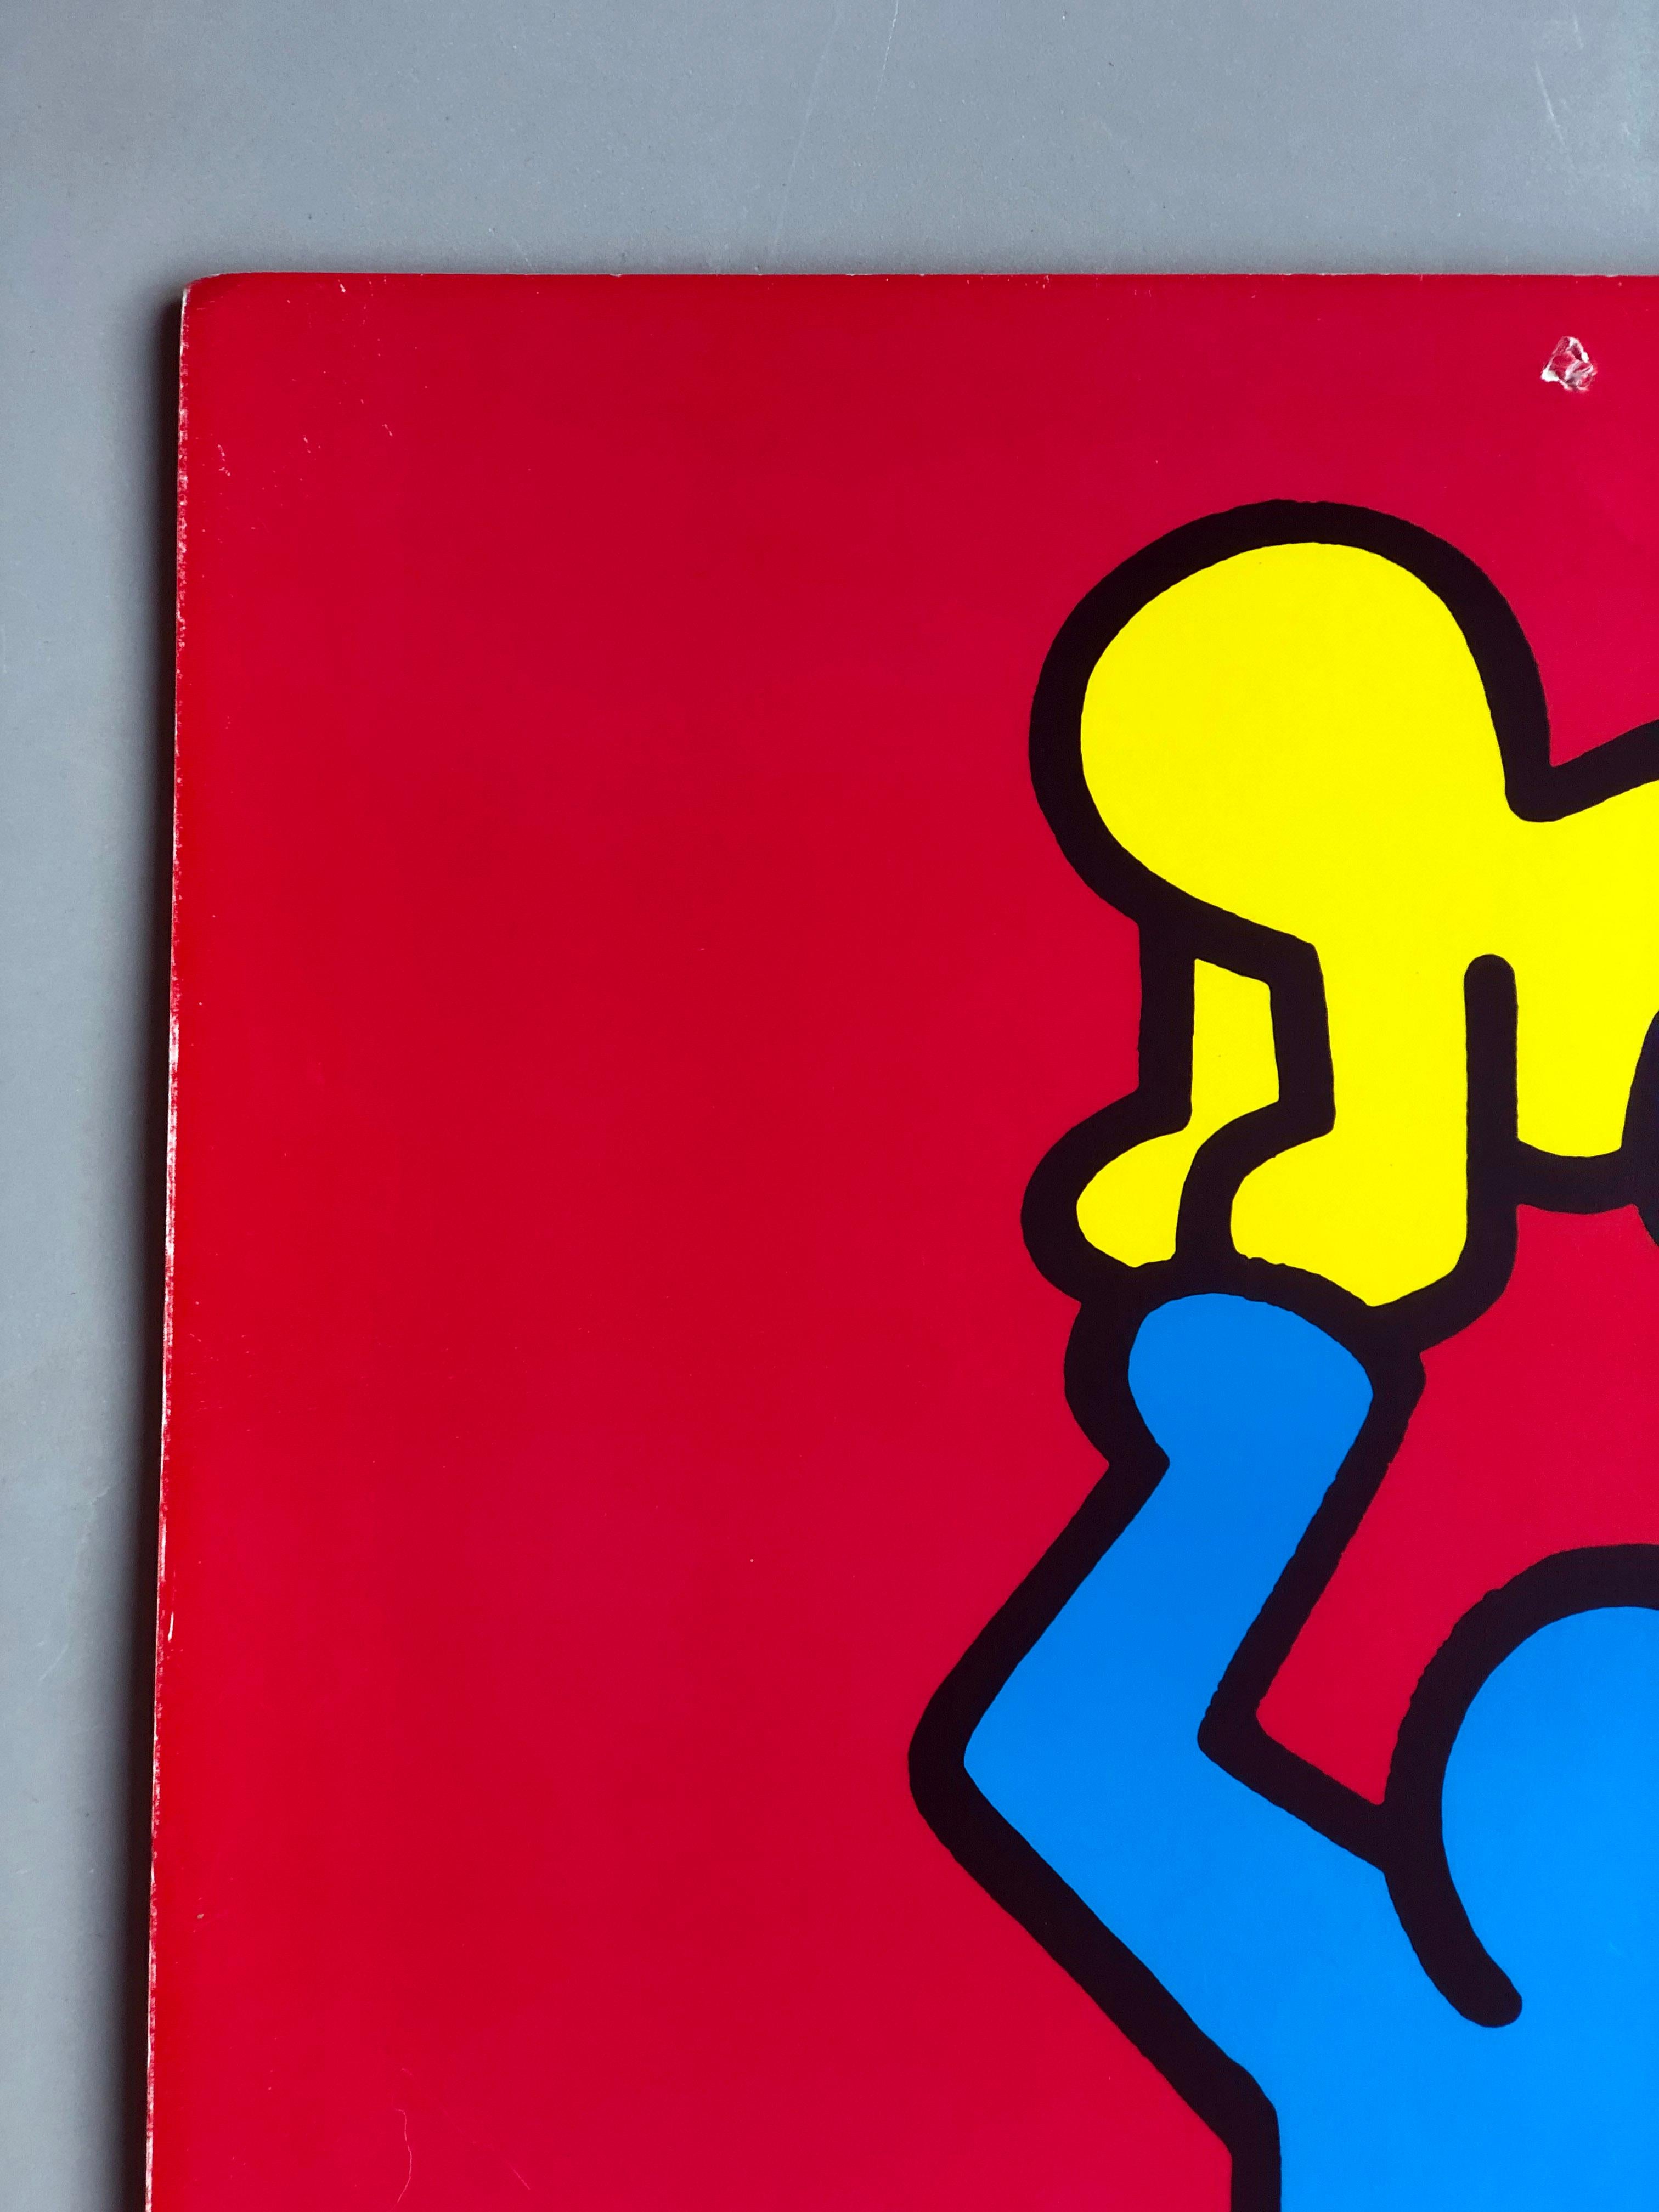 Paper Keith Haring 1991 - Man Holding Radiant Baby - Pop Art print on thick cardboard